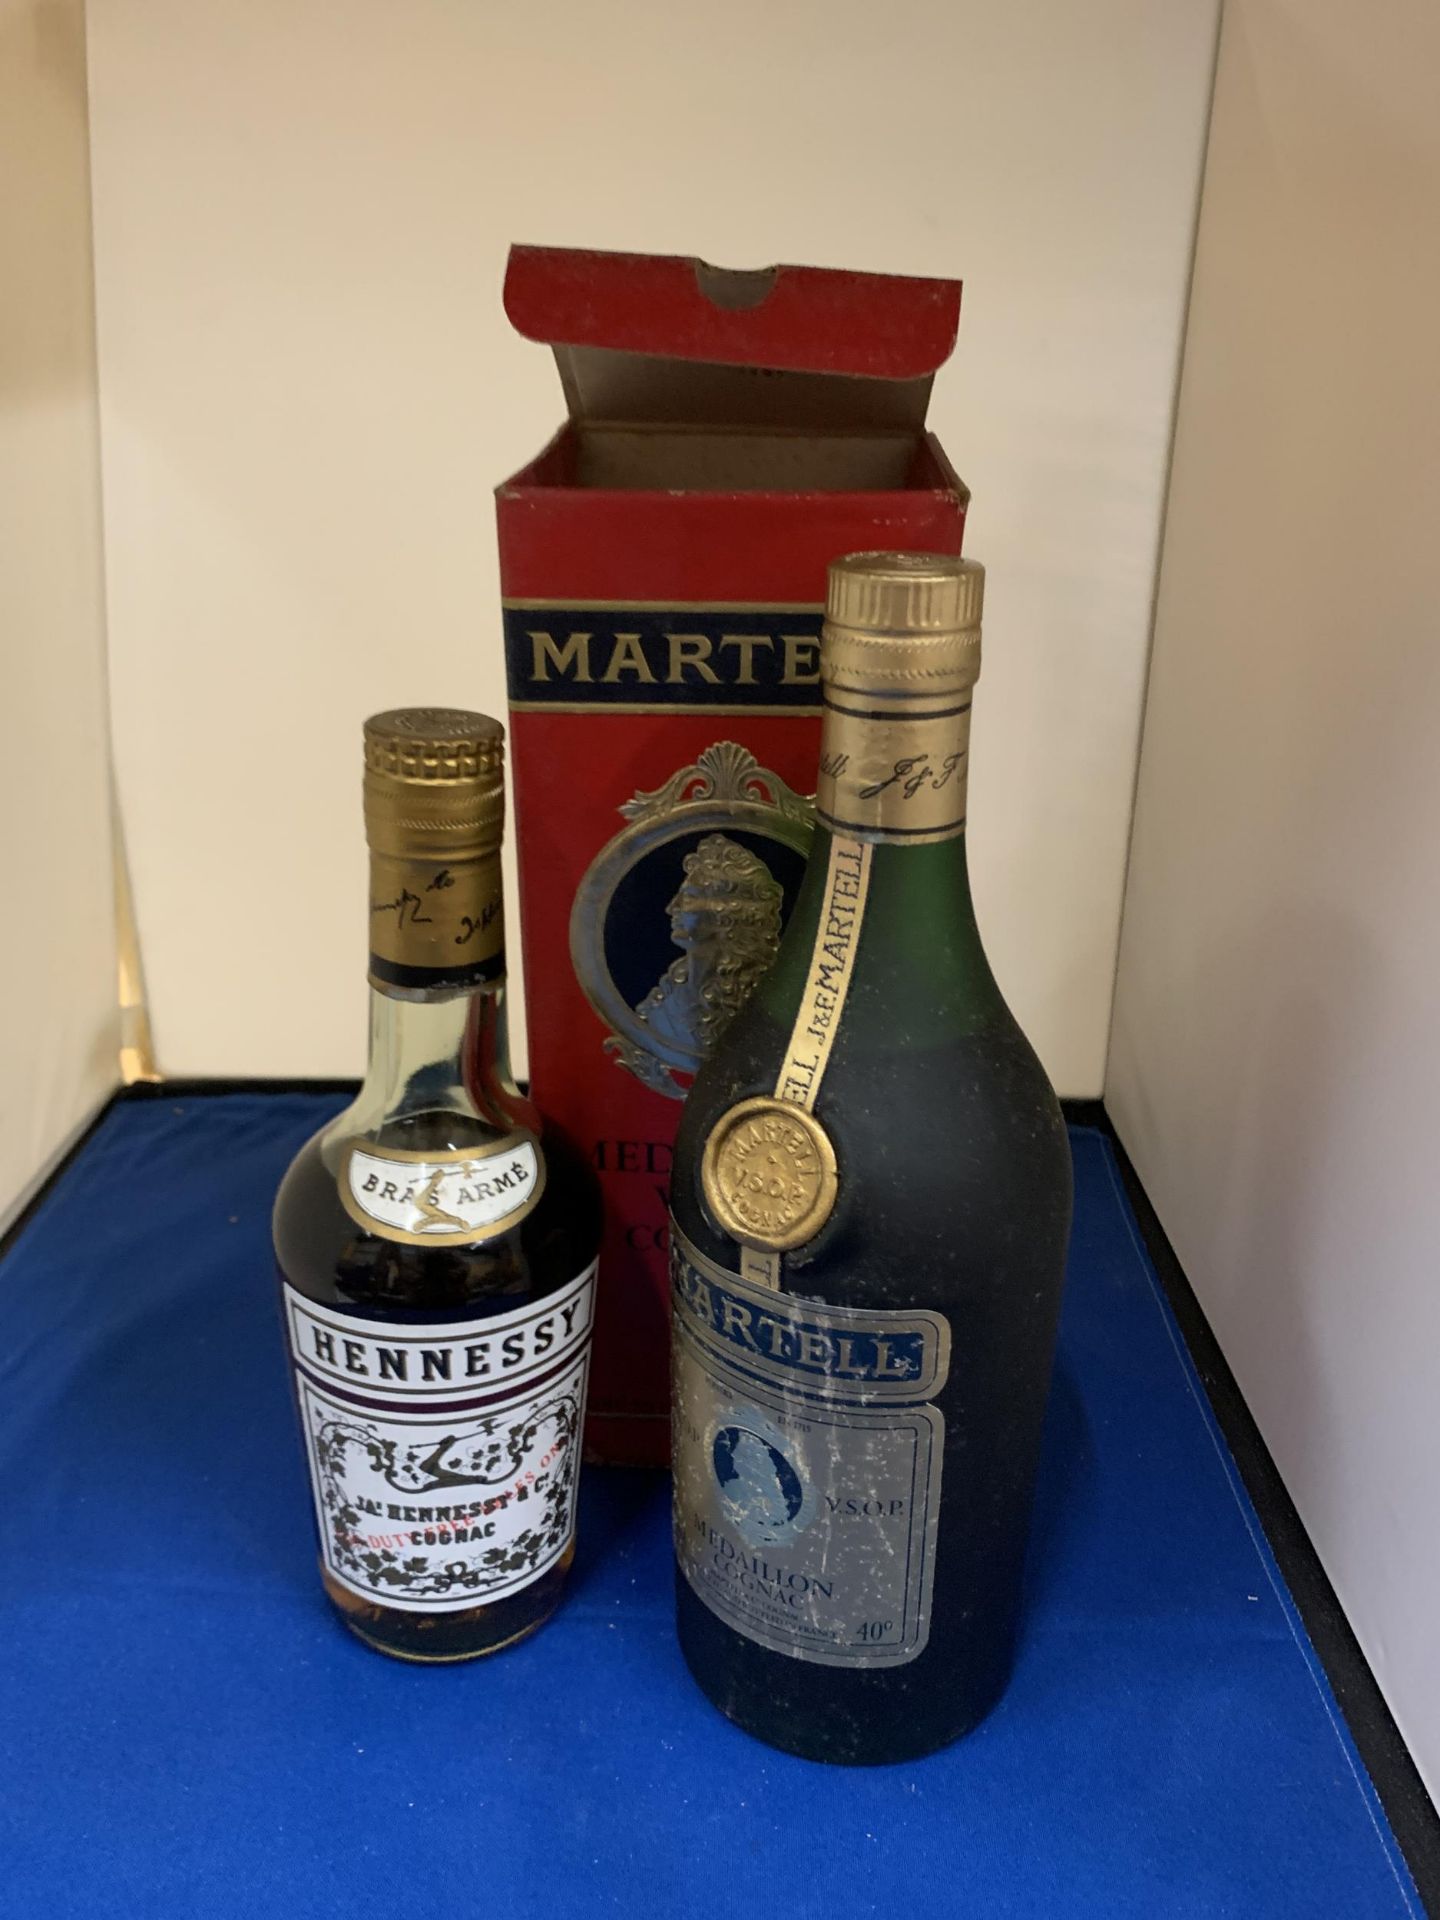 A BOXED BOTTLE OF MEDAILLON VSOP COGNAC AND A J A HENNESSY AND CO COGNAC